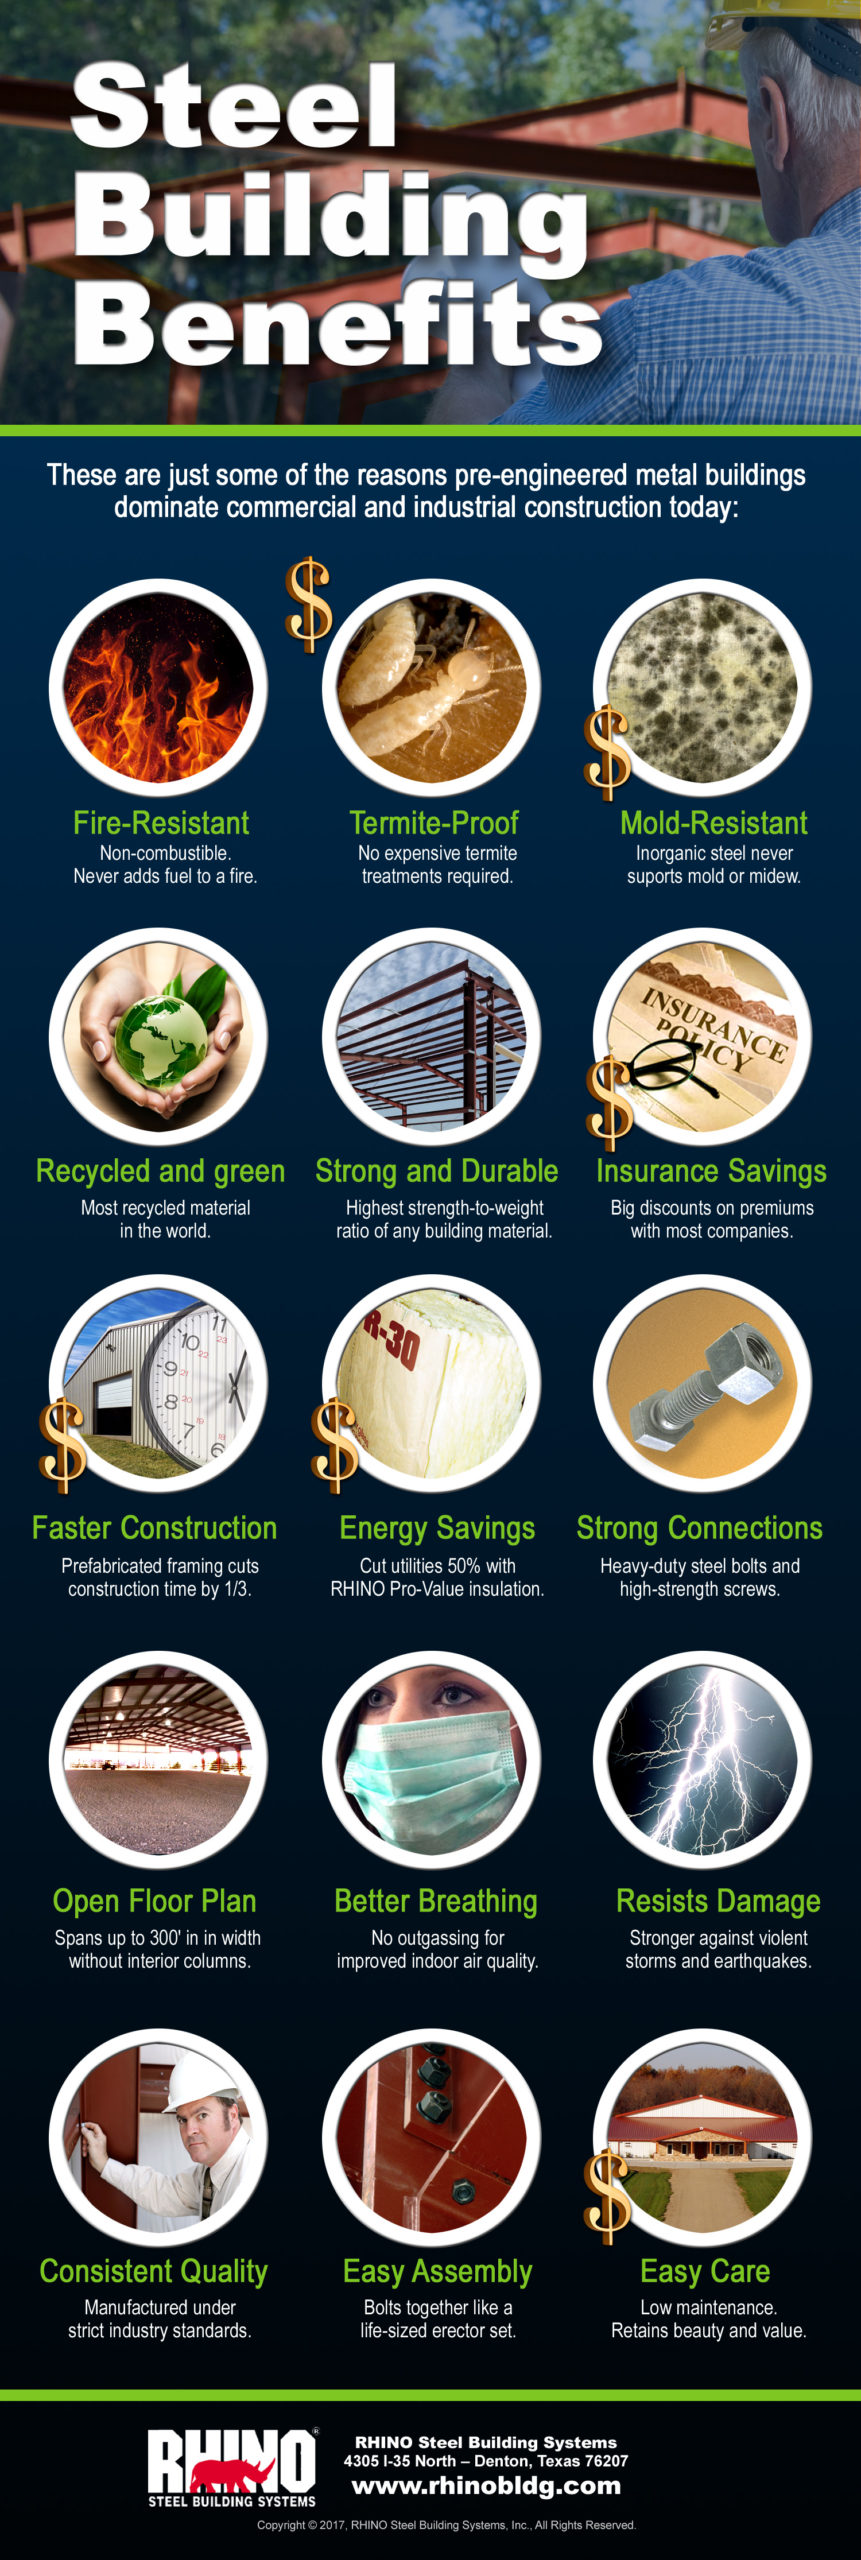 Inforgraphic detailing the steel building benefits provided by the RHINO building system.